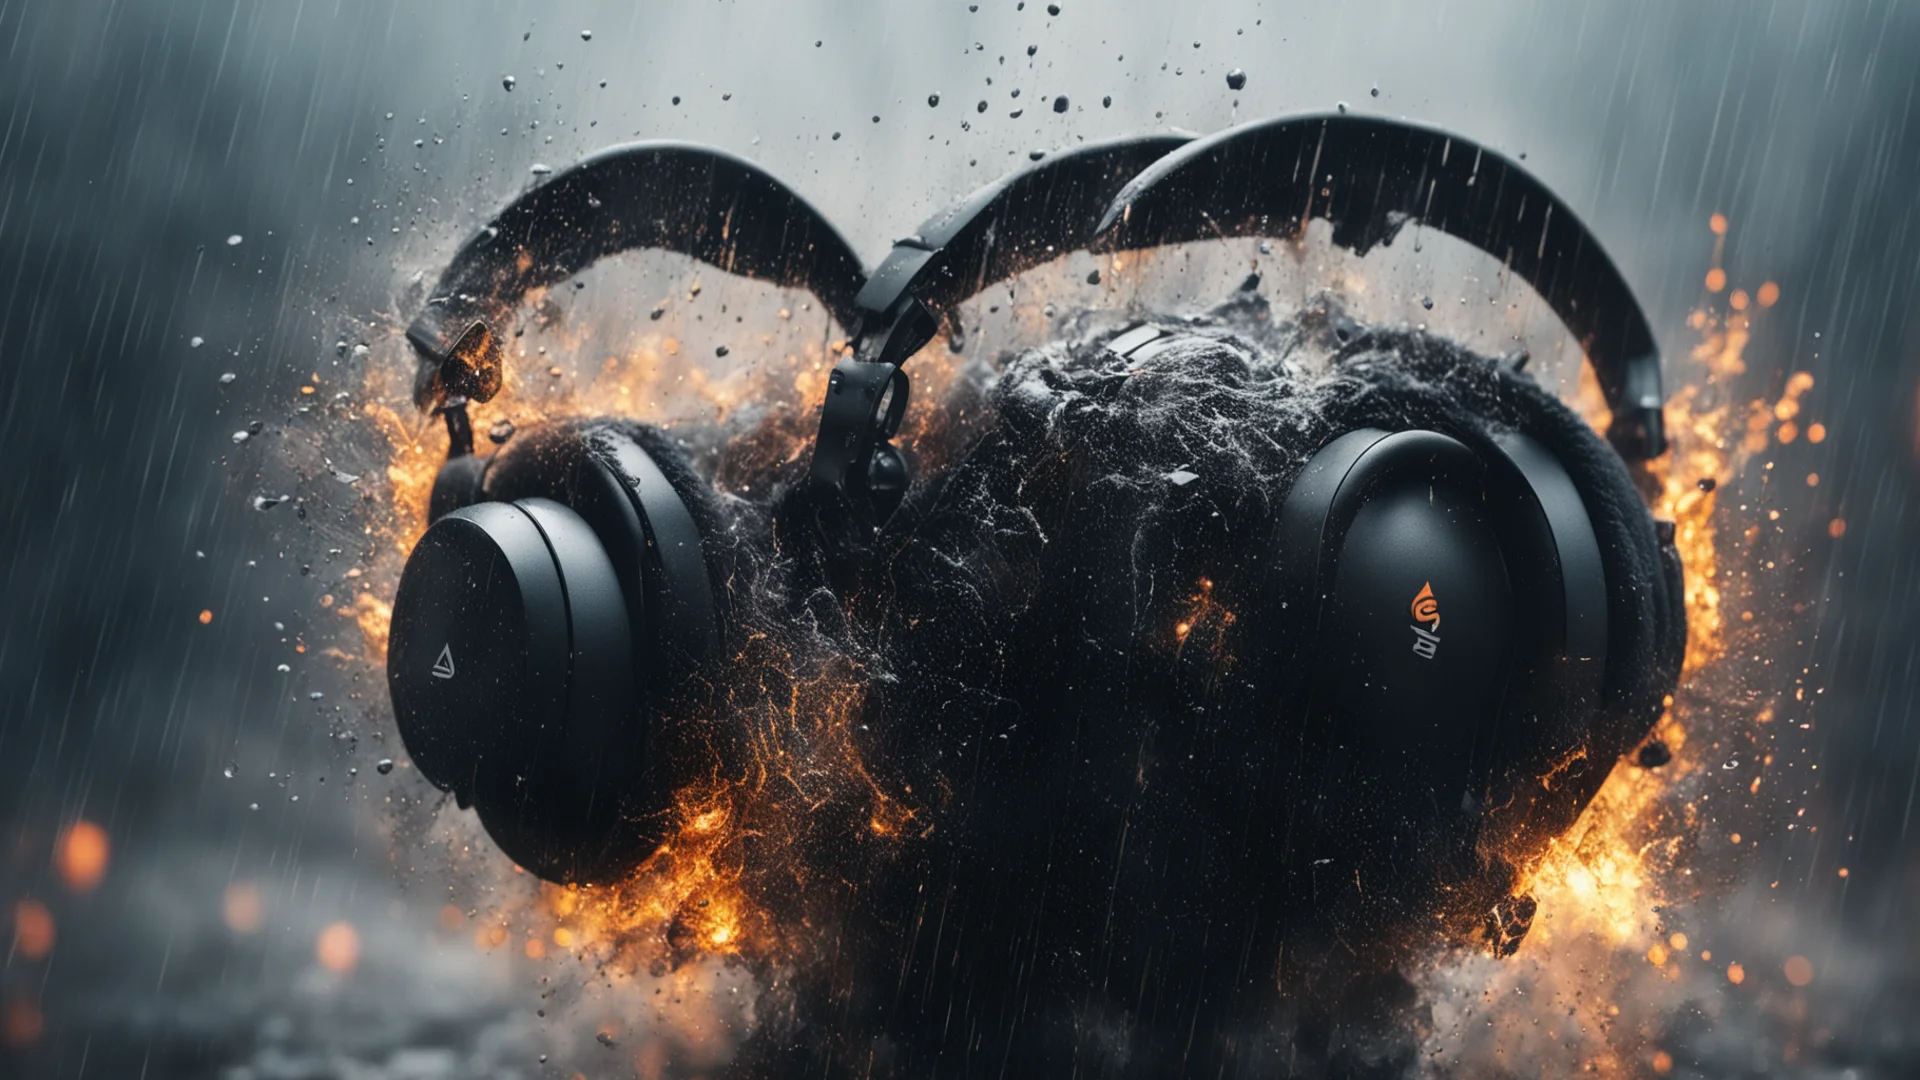 amazing product shot extreme bass boosted headphones exploding portrait surrounded by wet rain with cinematic light awesome portrait 2 wide